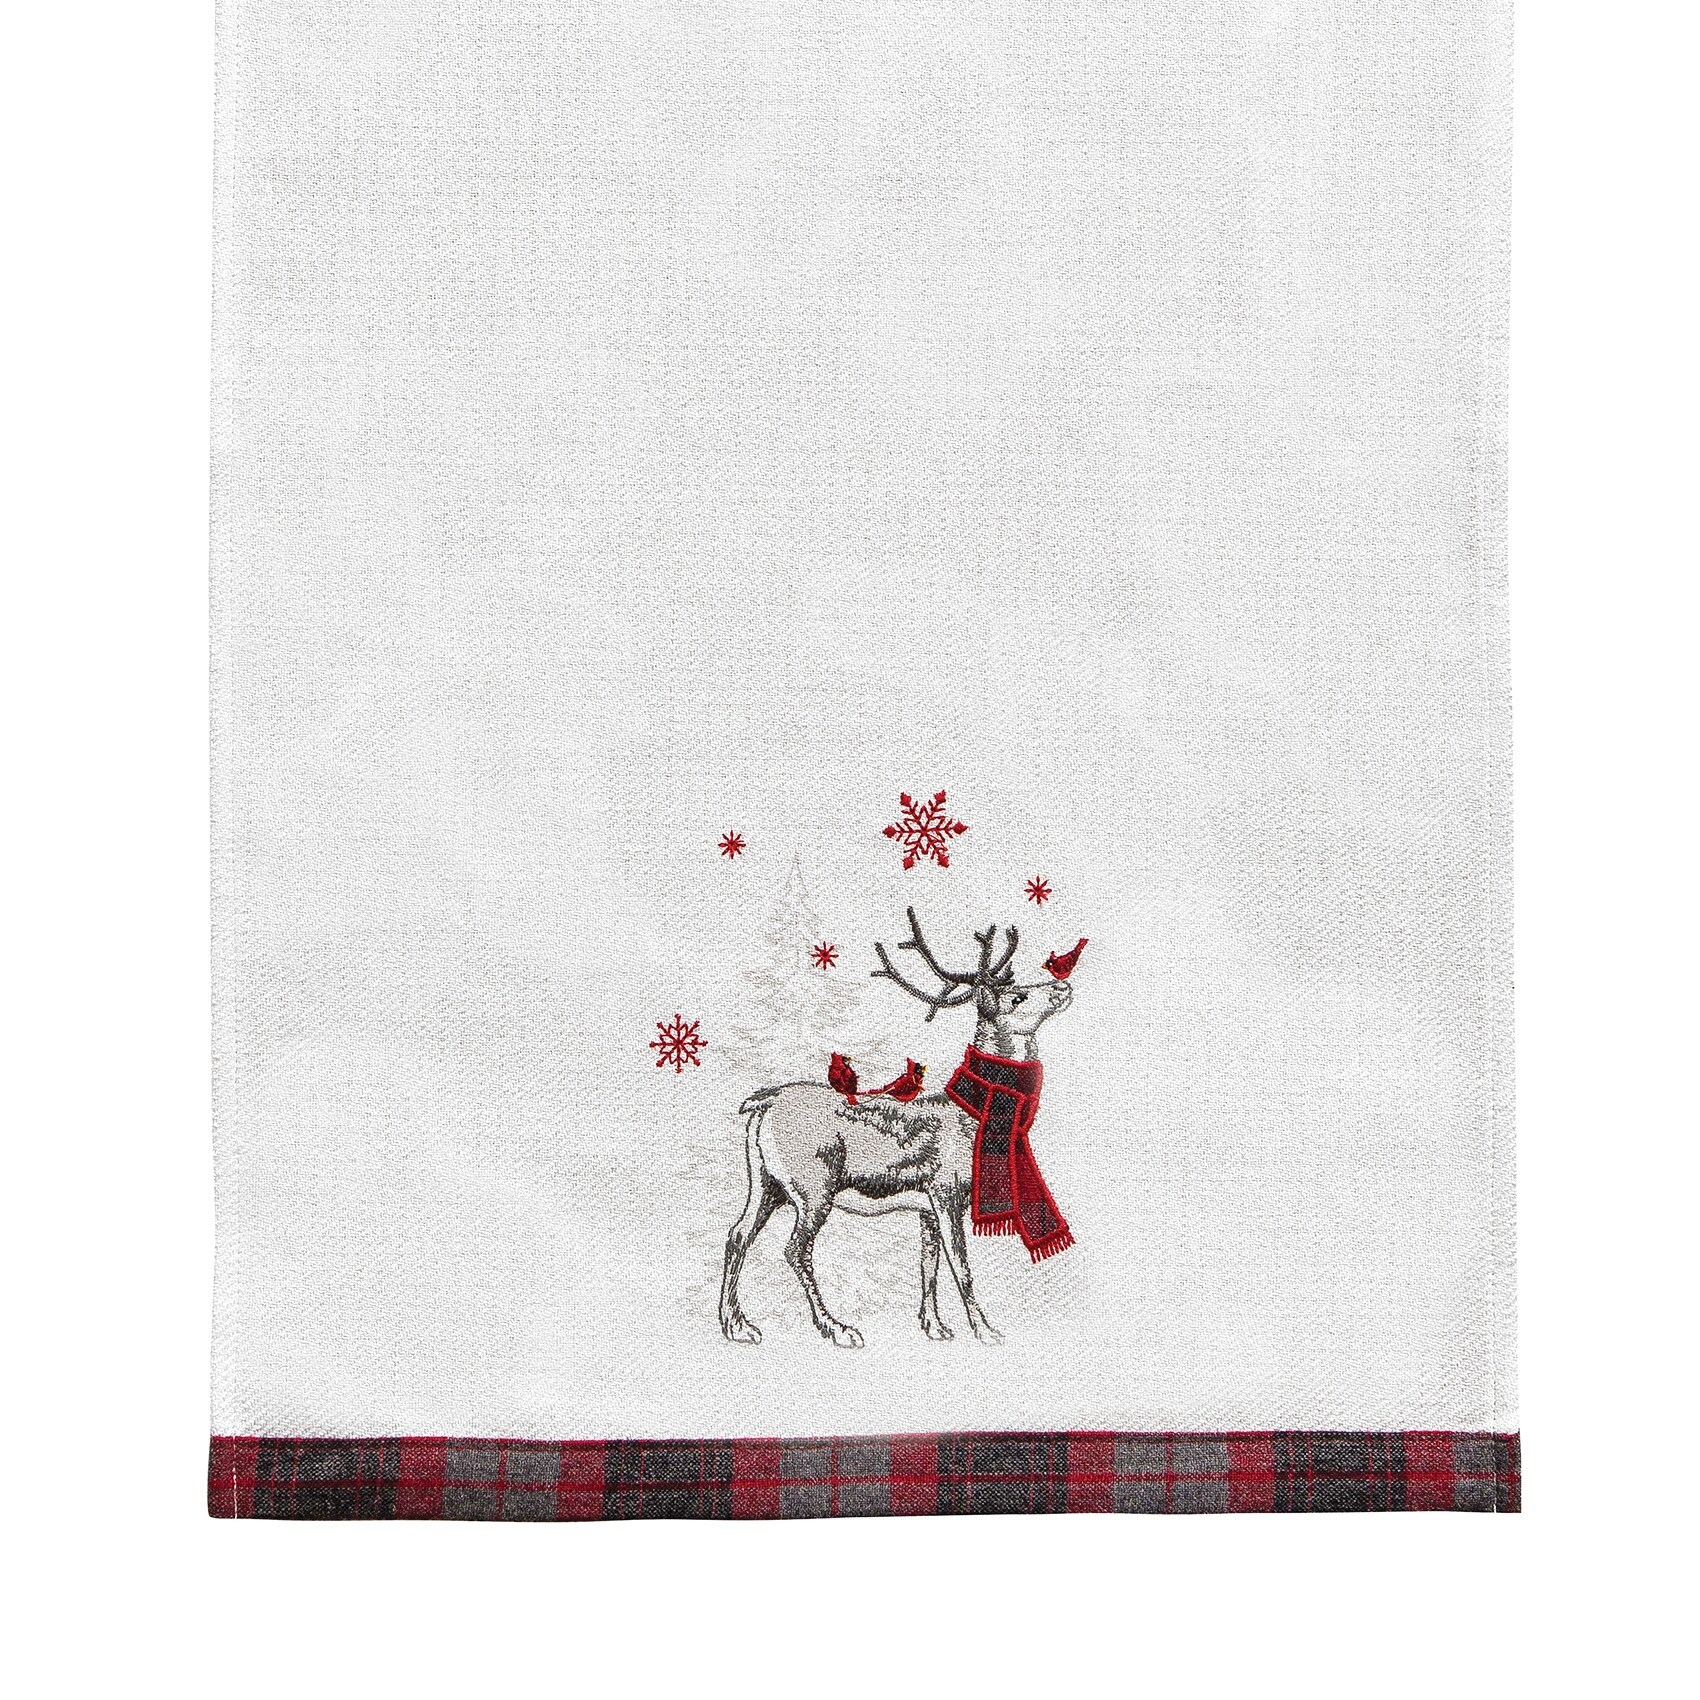 https://ak1.ostkcdn.com/images/products/is/images/direct/34586deb4ee73e6a3c60a4ace32ed61620b0db56/Frosty-Deer-with-Cardinals-Christmas-Embellished-Flour-Sack-Kitchen-Towel.jpg